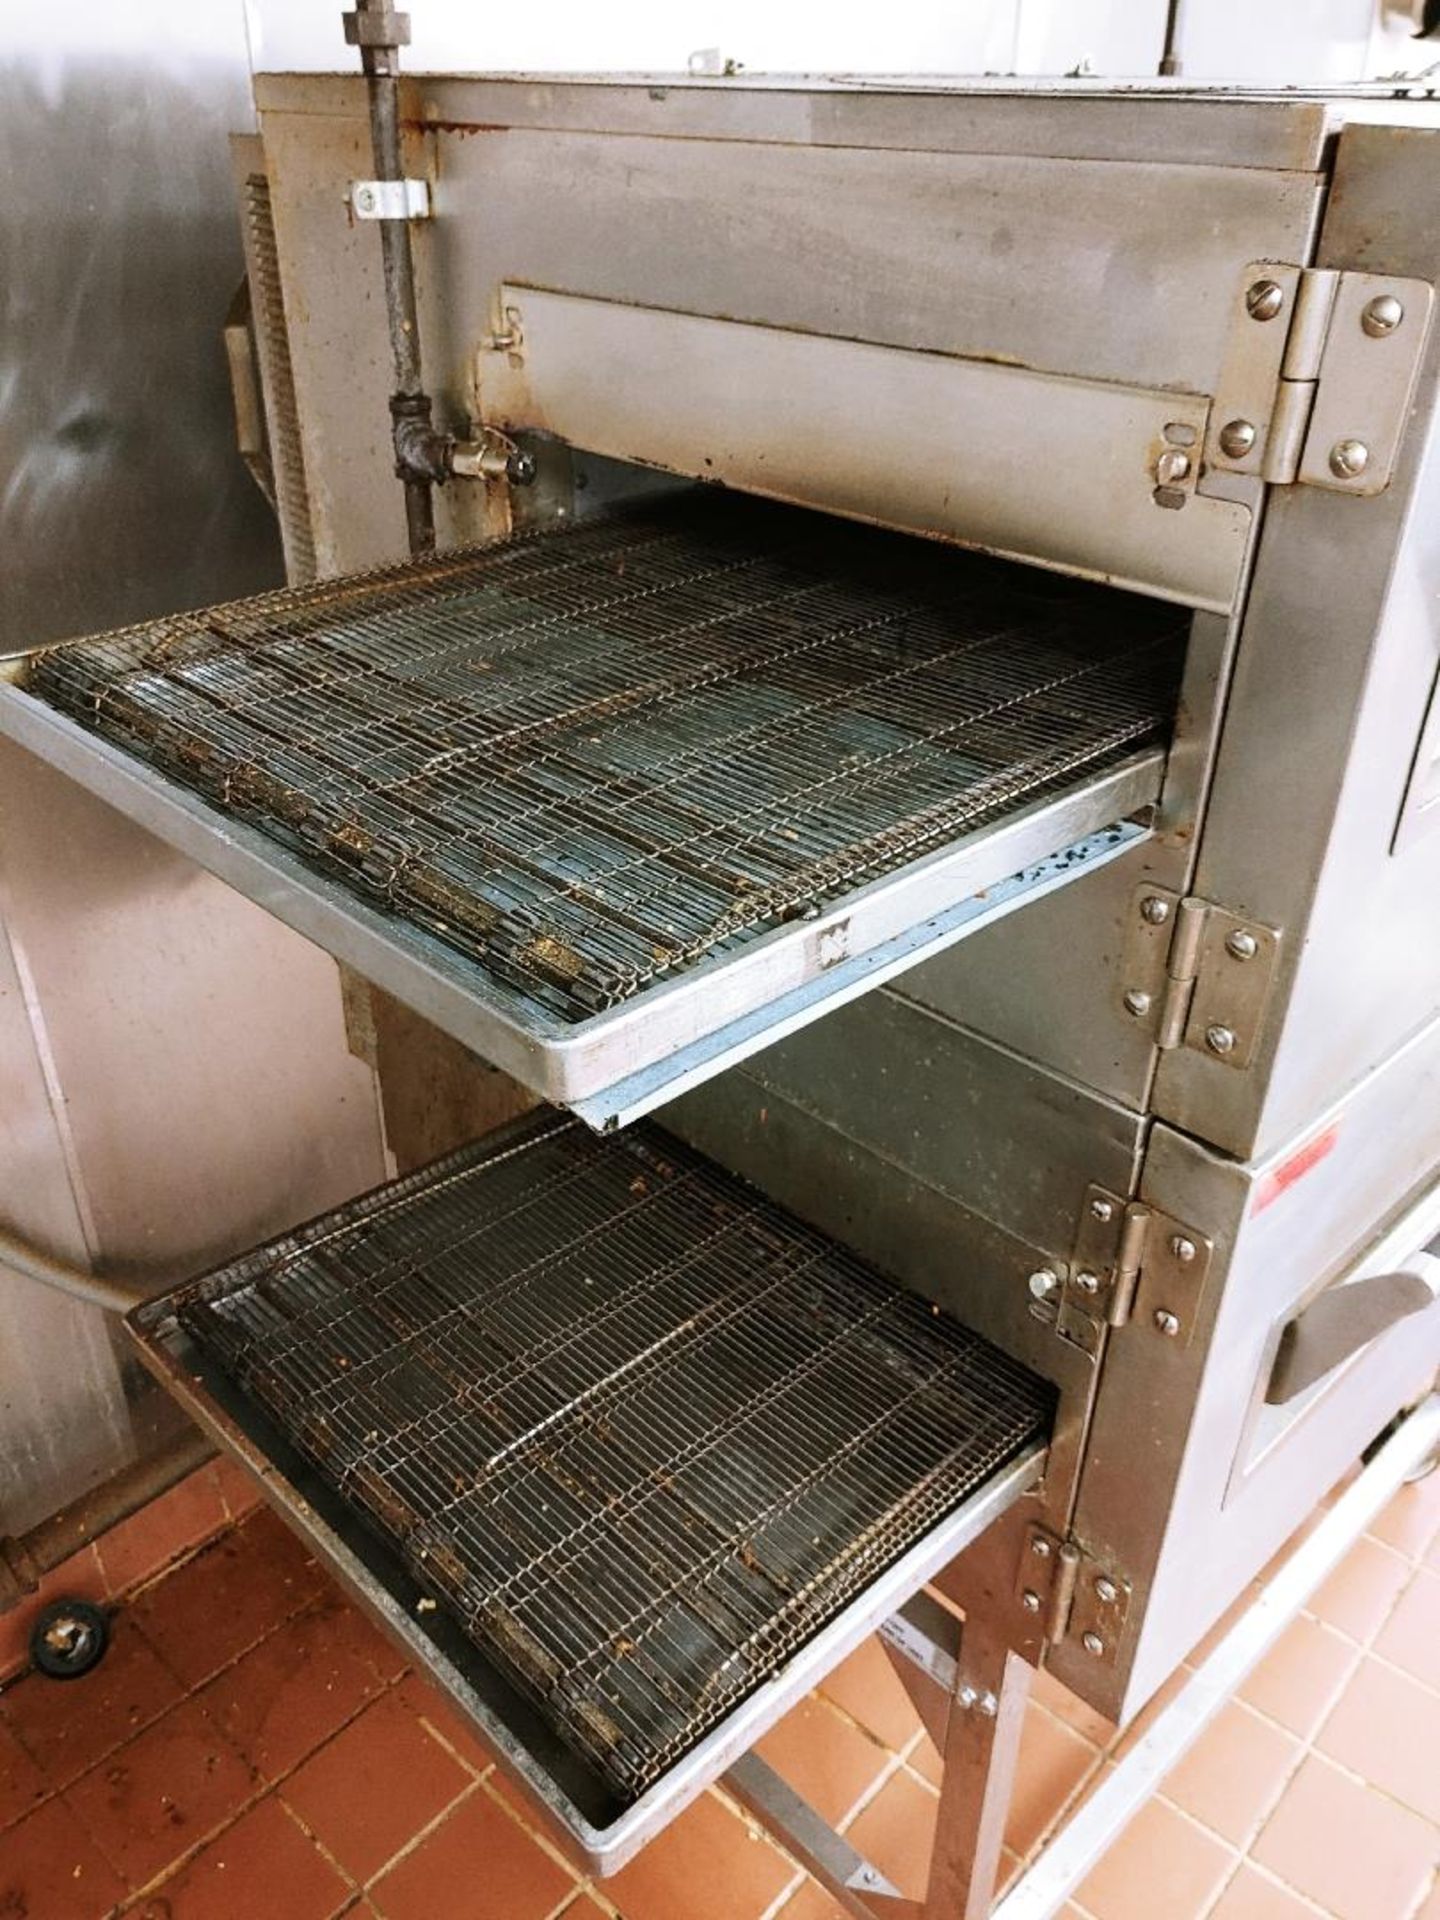 LINCOLN FOODSERVICE PRODUCTS INC. DUAL CONVEYOR PIZZA OVEN WITH DIGITAL CONTROL PANELS, MODEL 1162-0 - Image 2 of 5